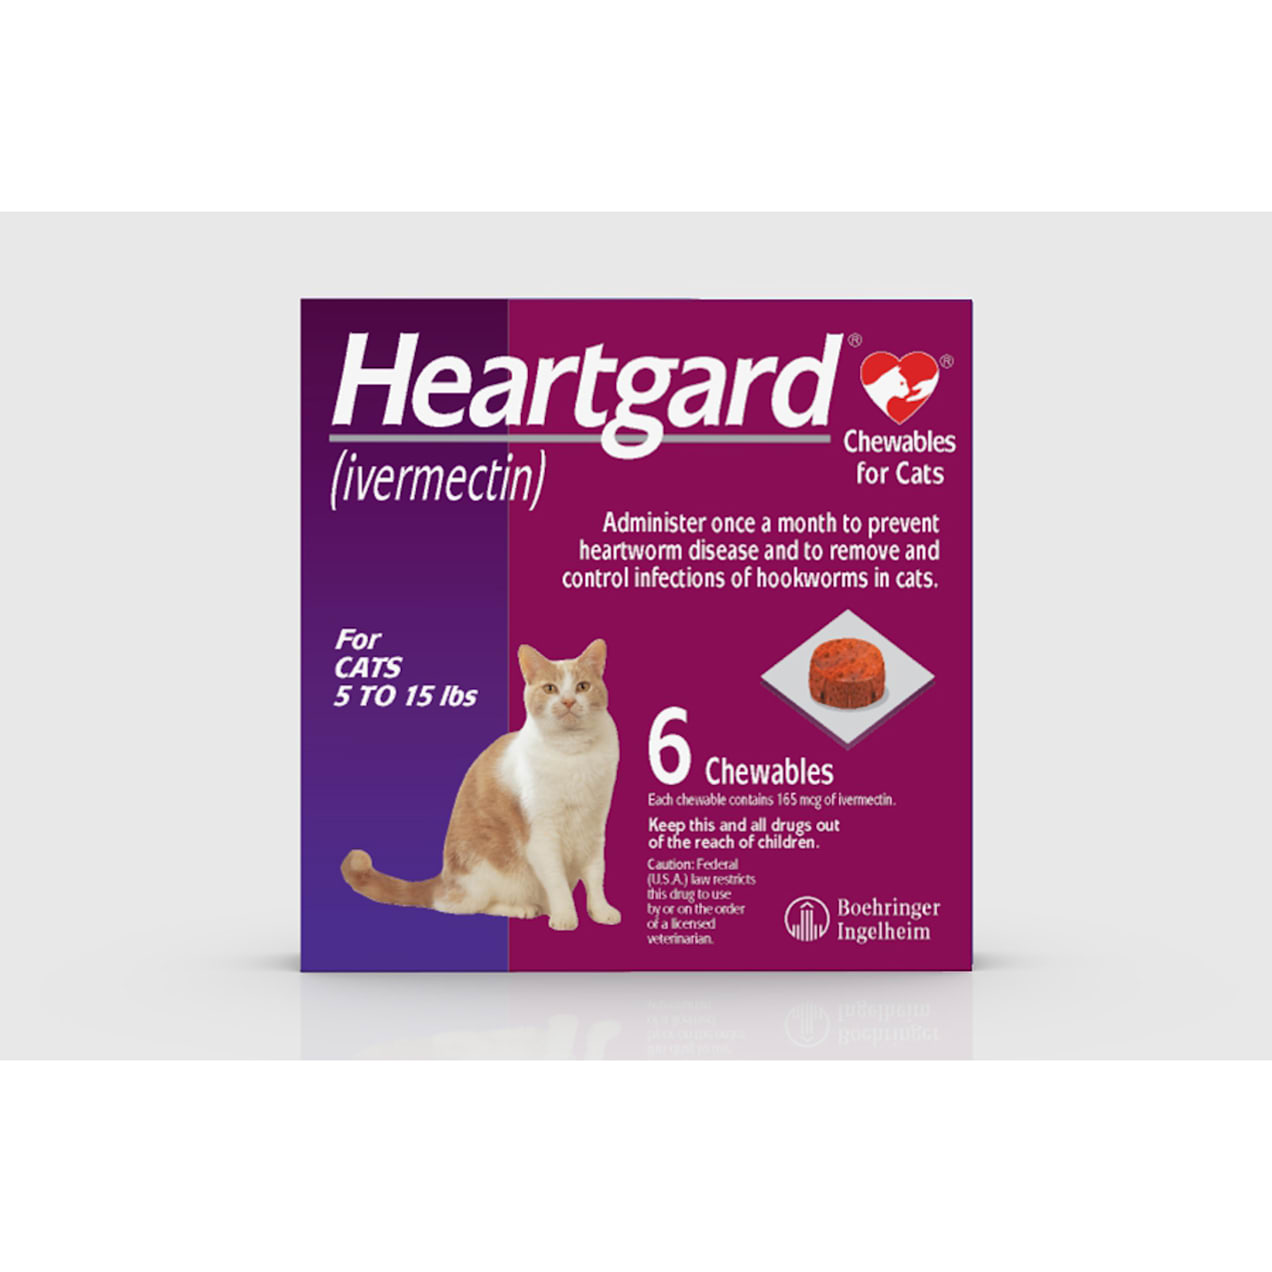 Heartgard Chewables for Cats 5 to 15 lbs., 6 Pack Petco